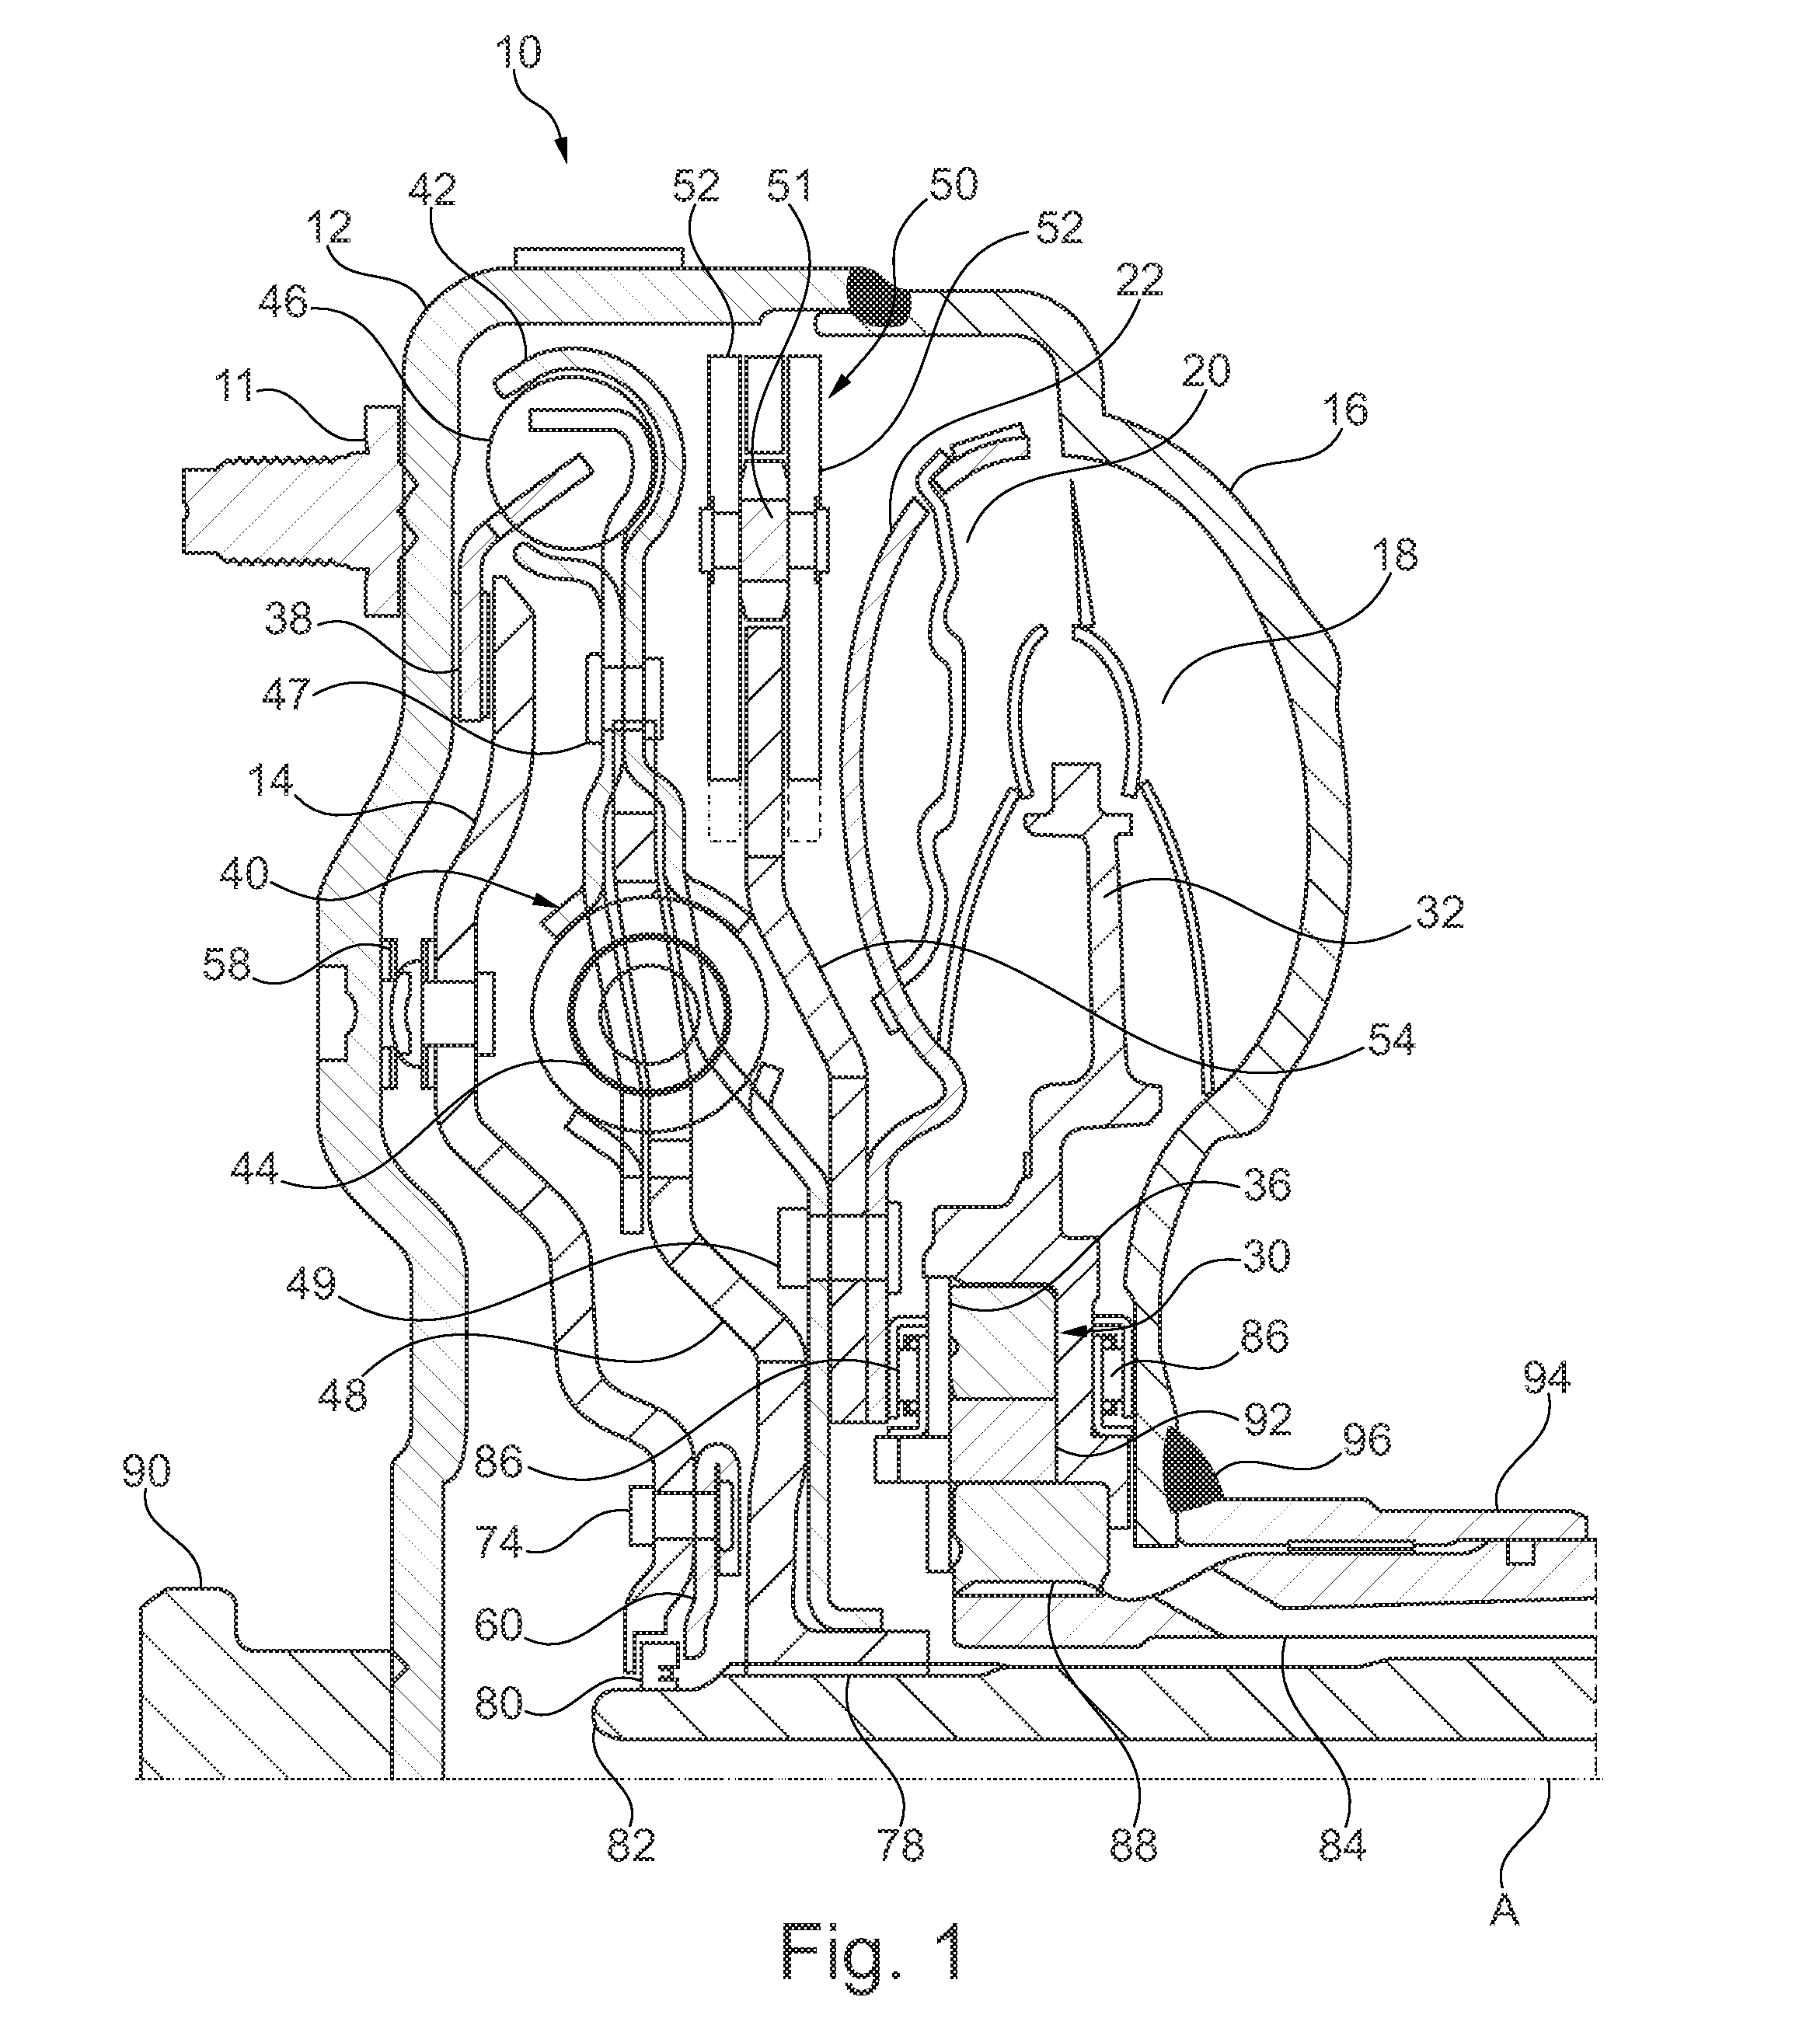 Folded seal retention plate with thrust surface